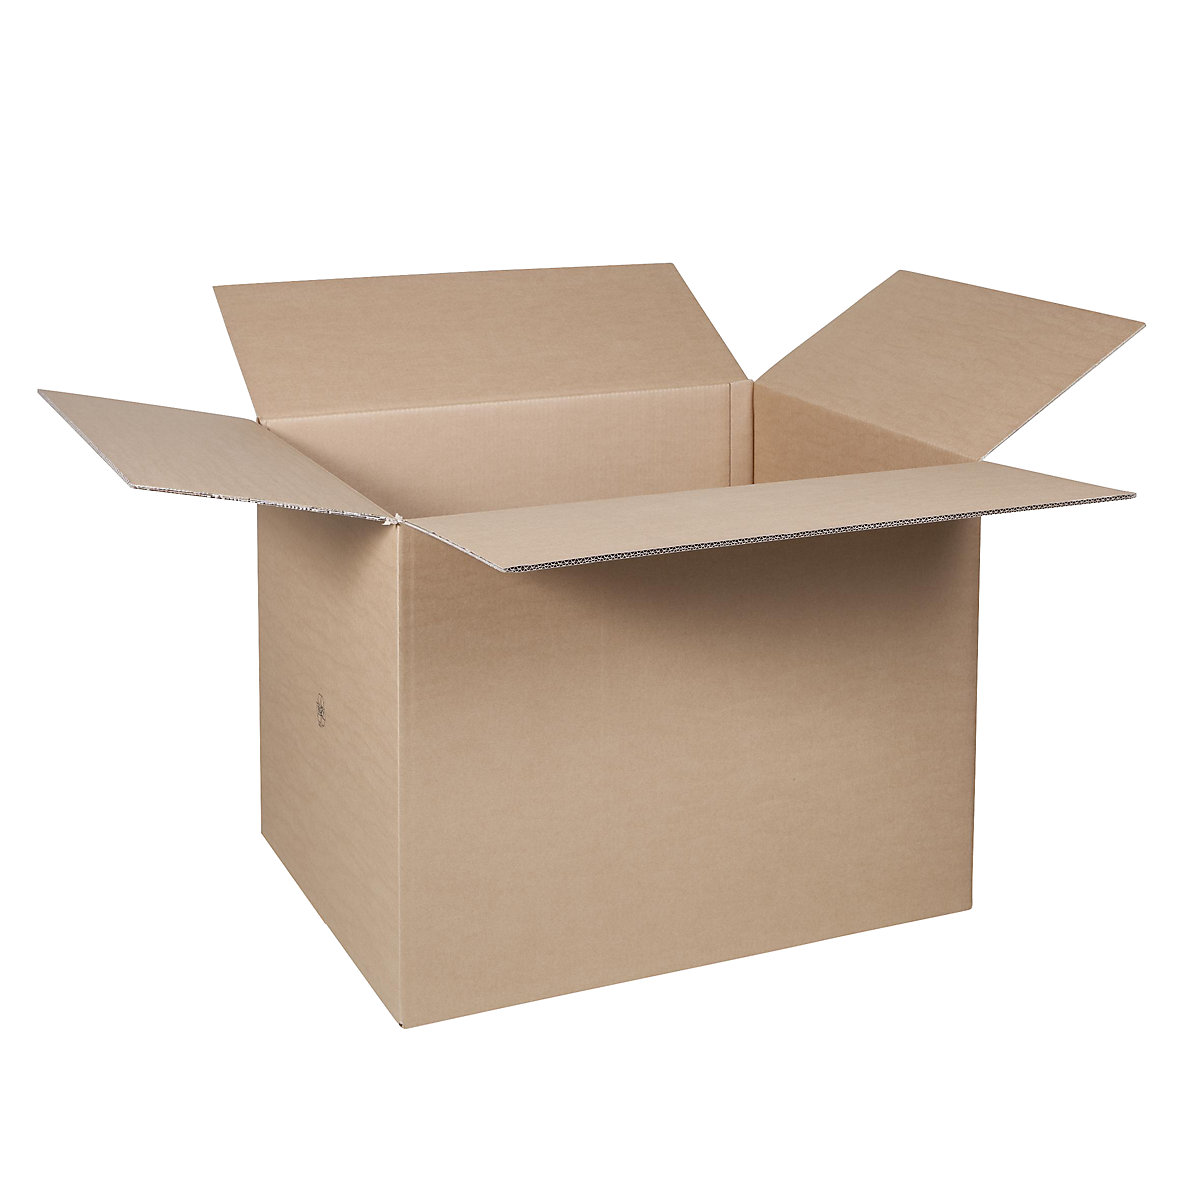 Folding cardboard box, FEFCO 0201, made of double fluted cardboard, internal dimensions 700 x 400 x 400 mm, pack of 50-33